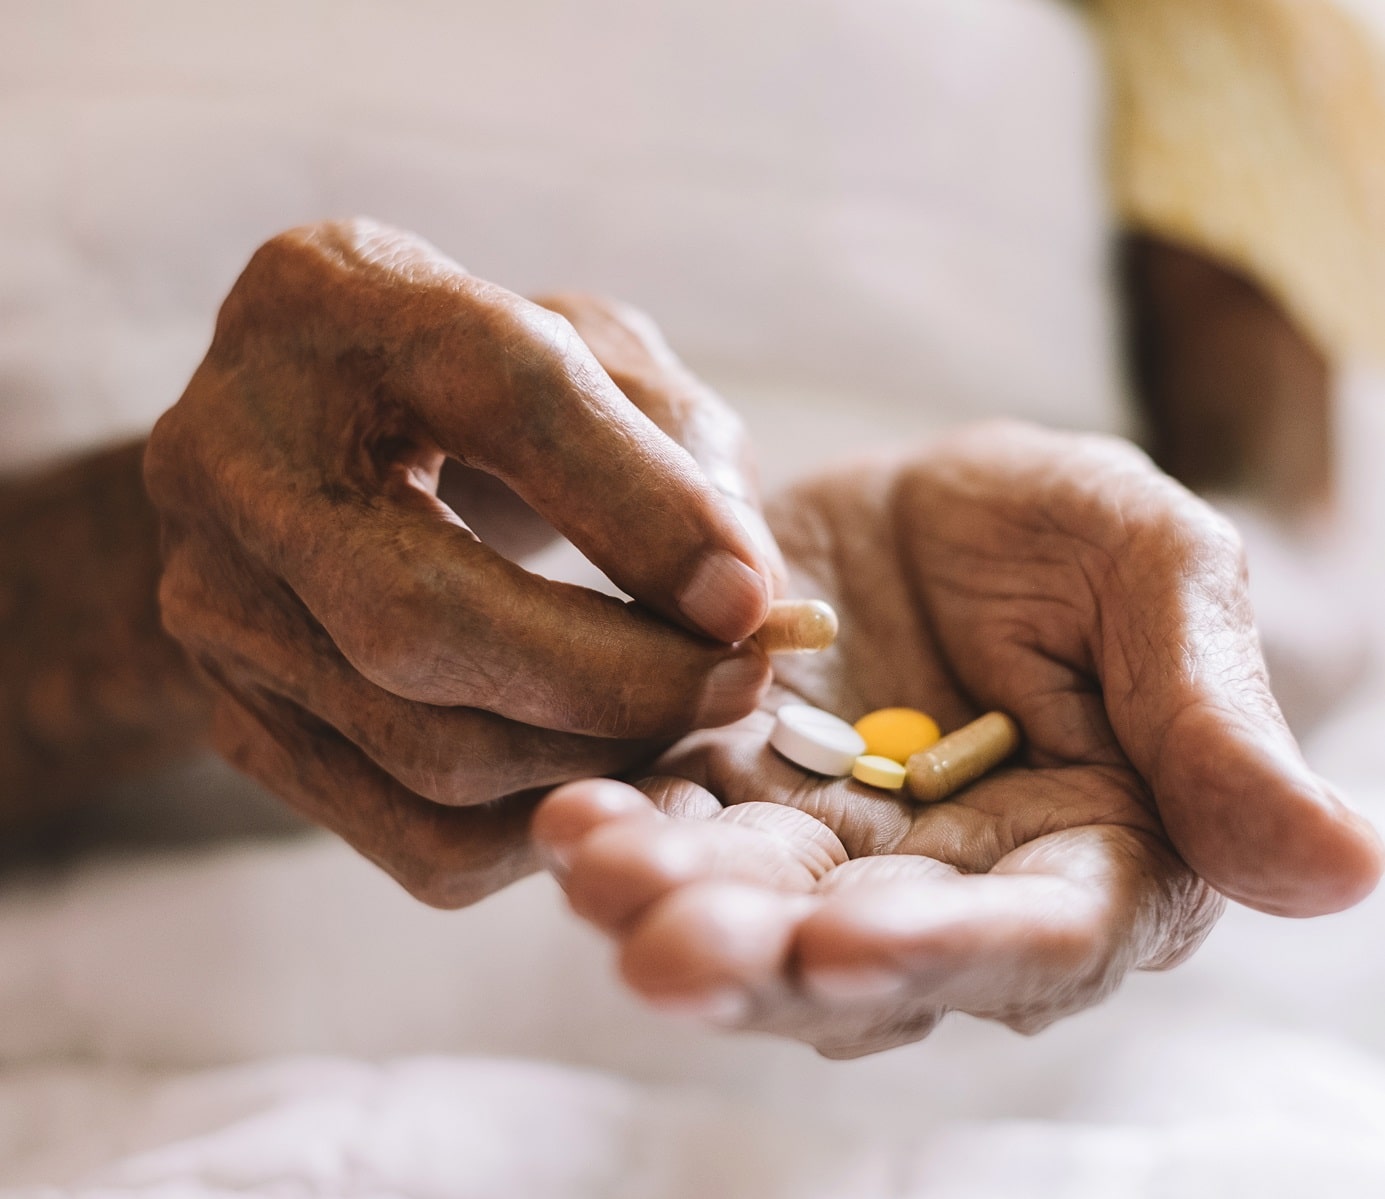 Compare Rehab UK|Drug Abuse & Addiction in the Elderly, Signs & Symptoms